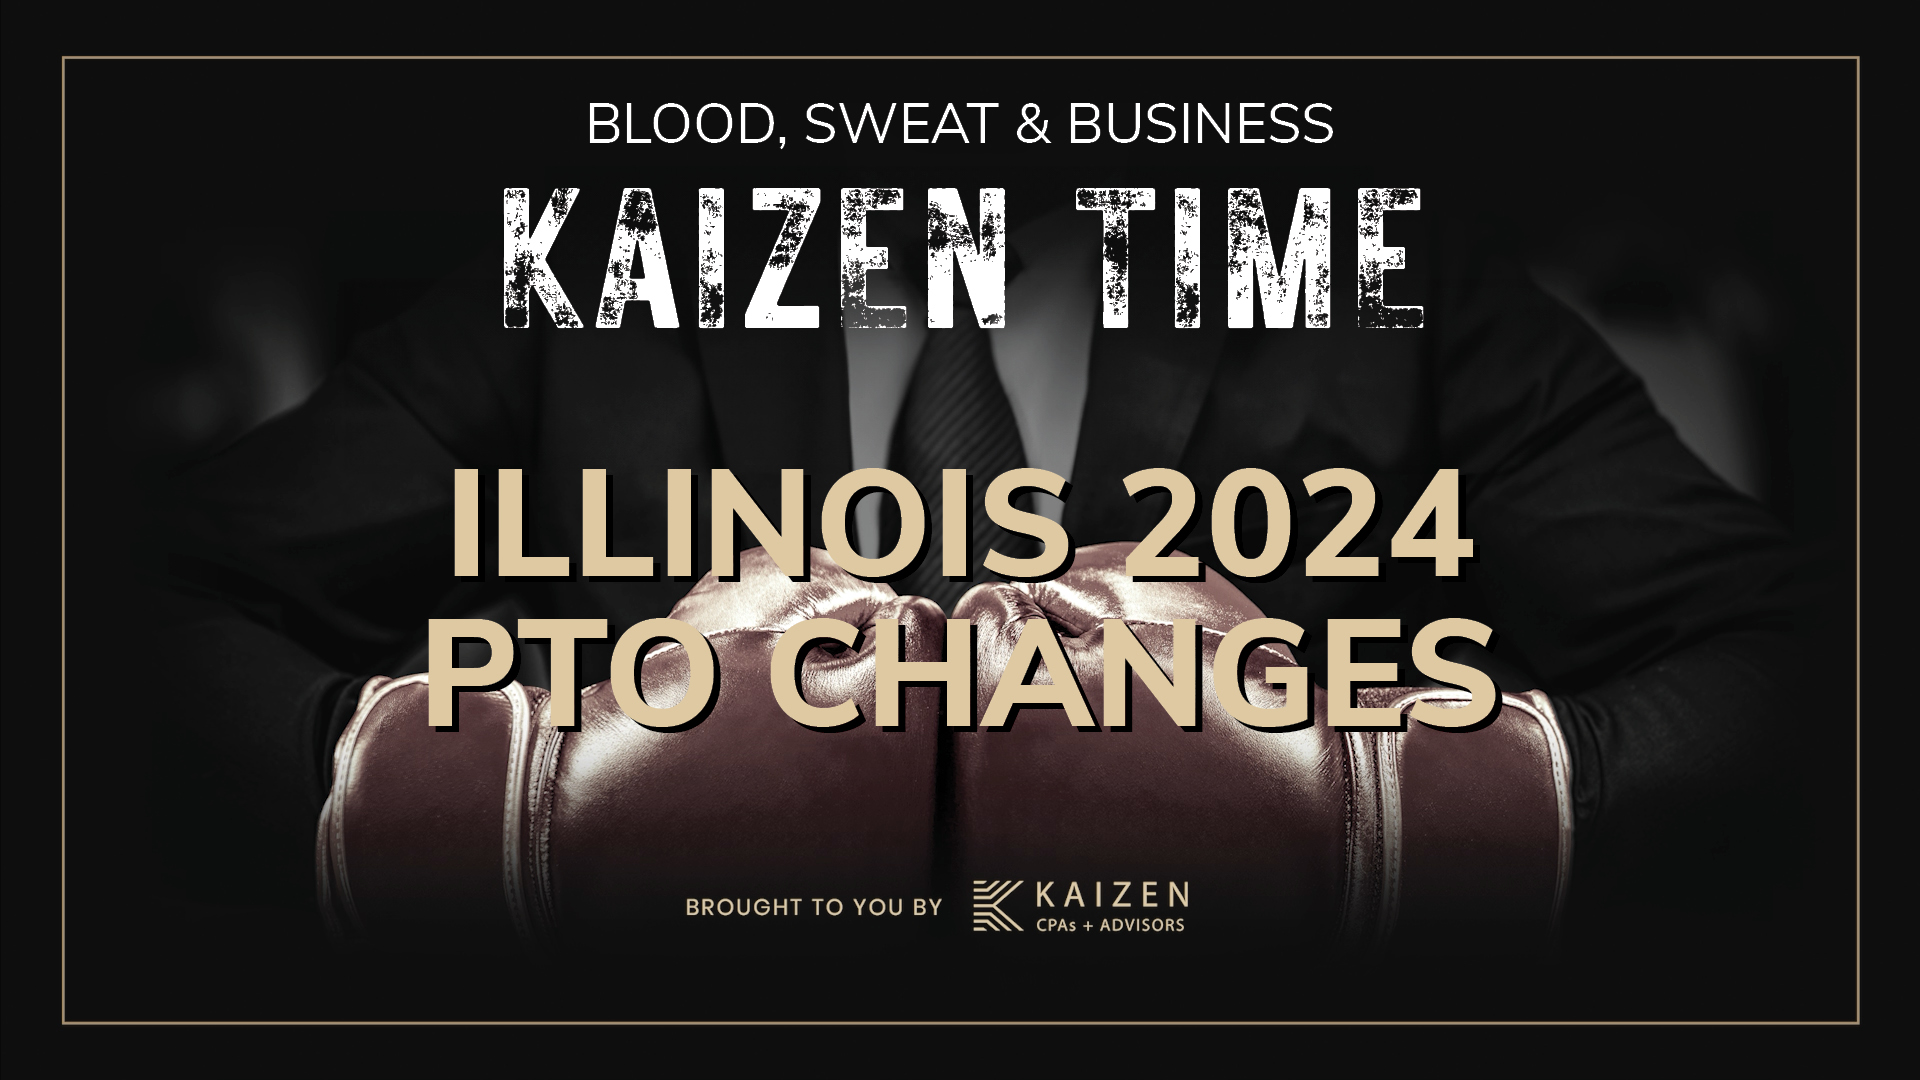 Starting in January 2024, Illinois has introduced a new act that changes how Paid Time Off (PTO) is accrued. 